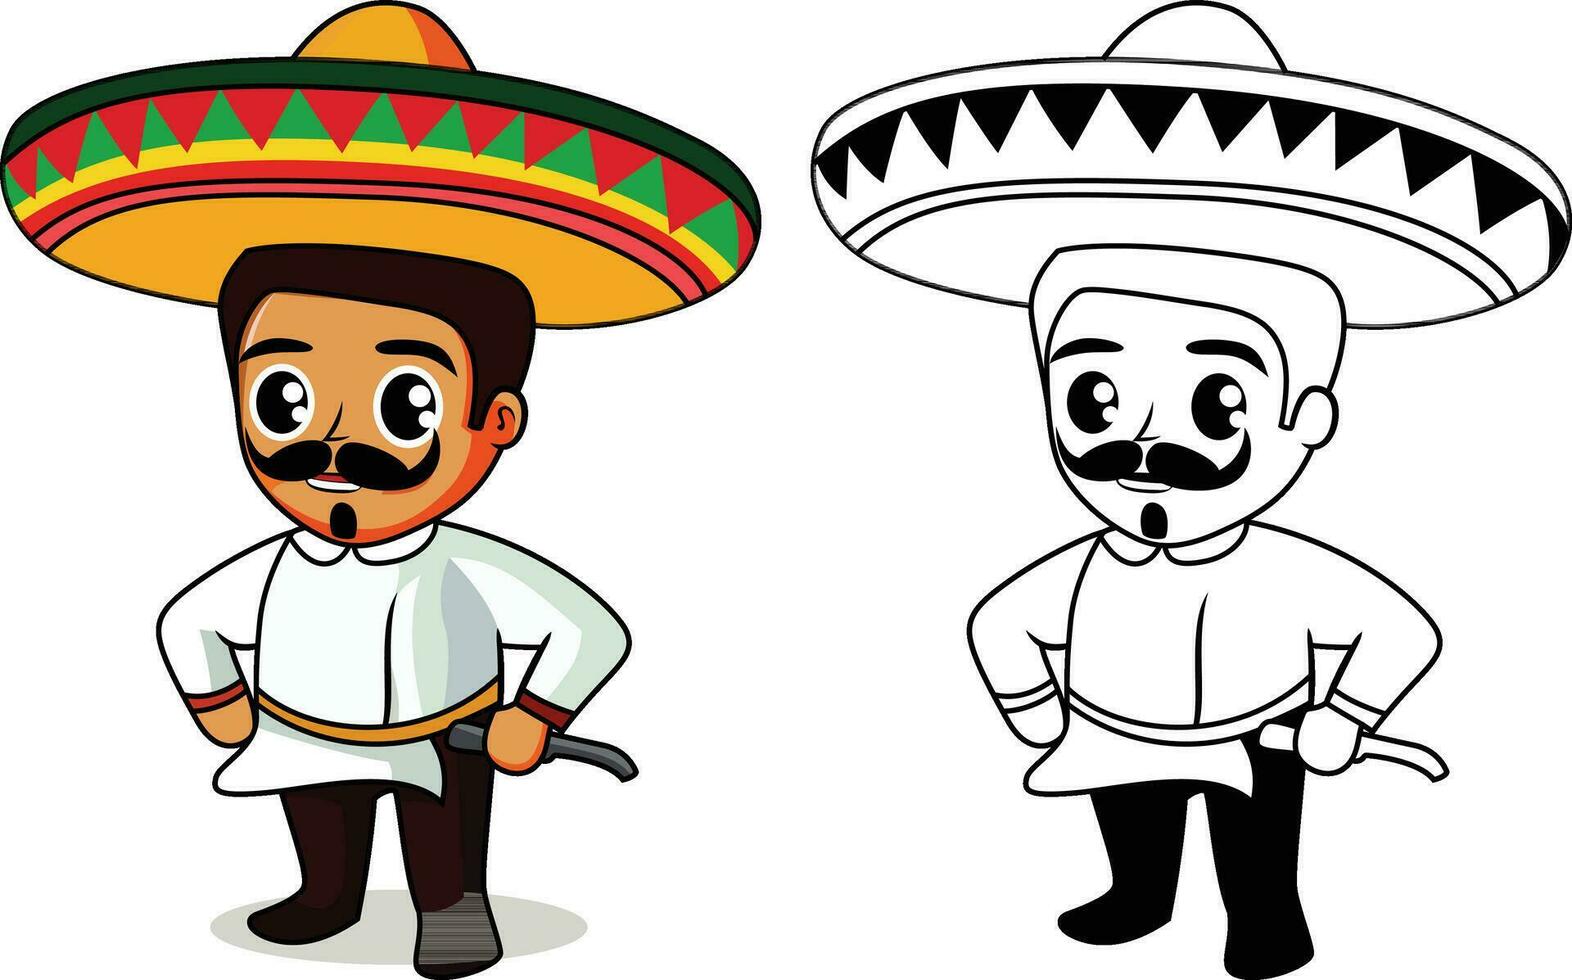 Mexican Chef with a mustache wearing a sombrero cartoon vector illustration, Mexican cook , chef wearing a Mexican hat with Stache , hands on hip colored and black and white stock vector image